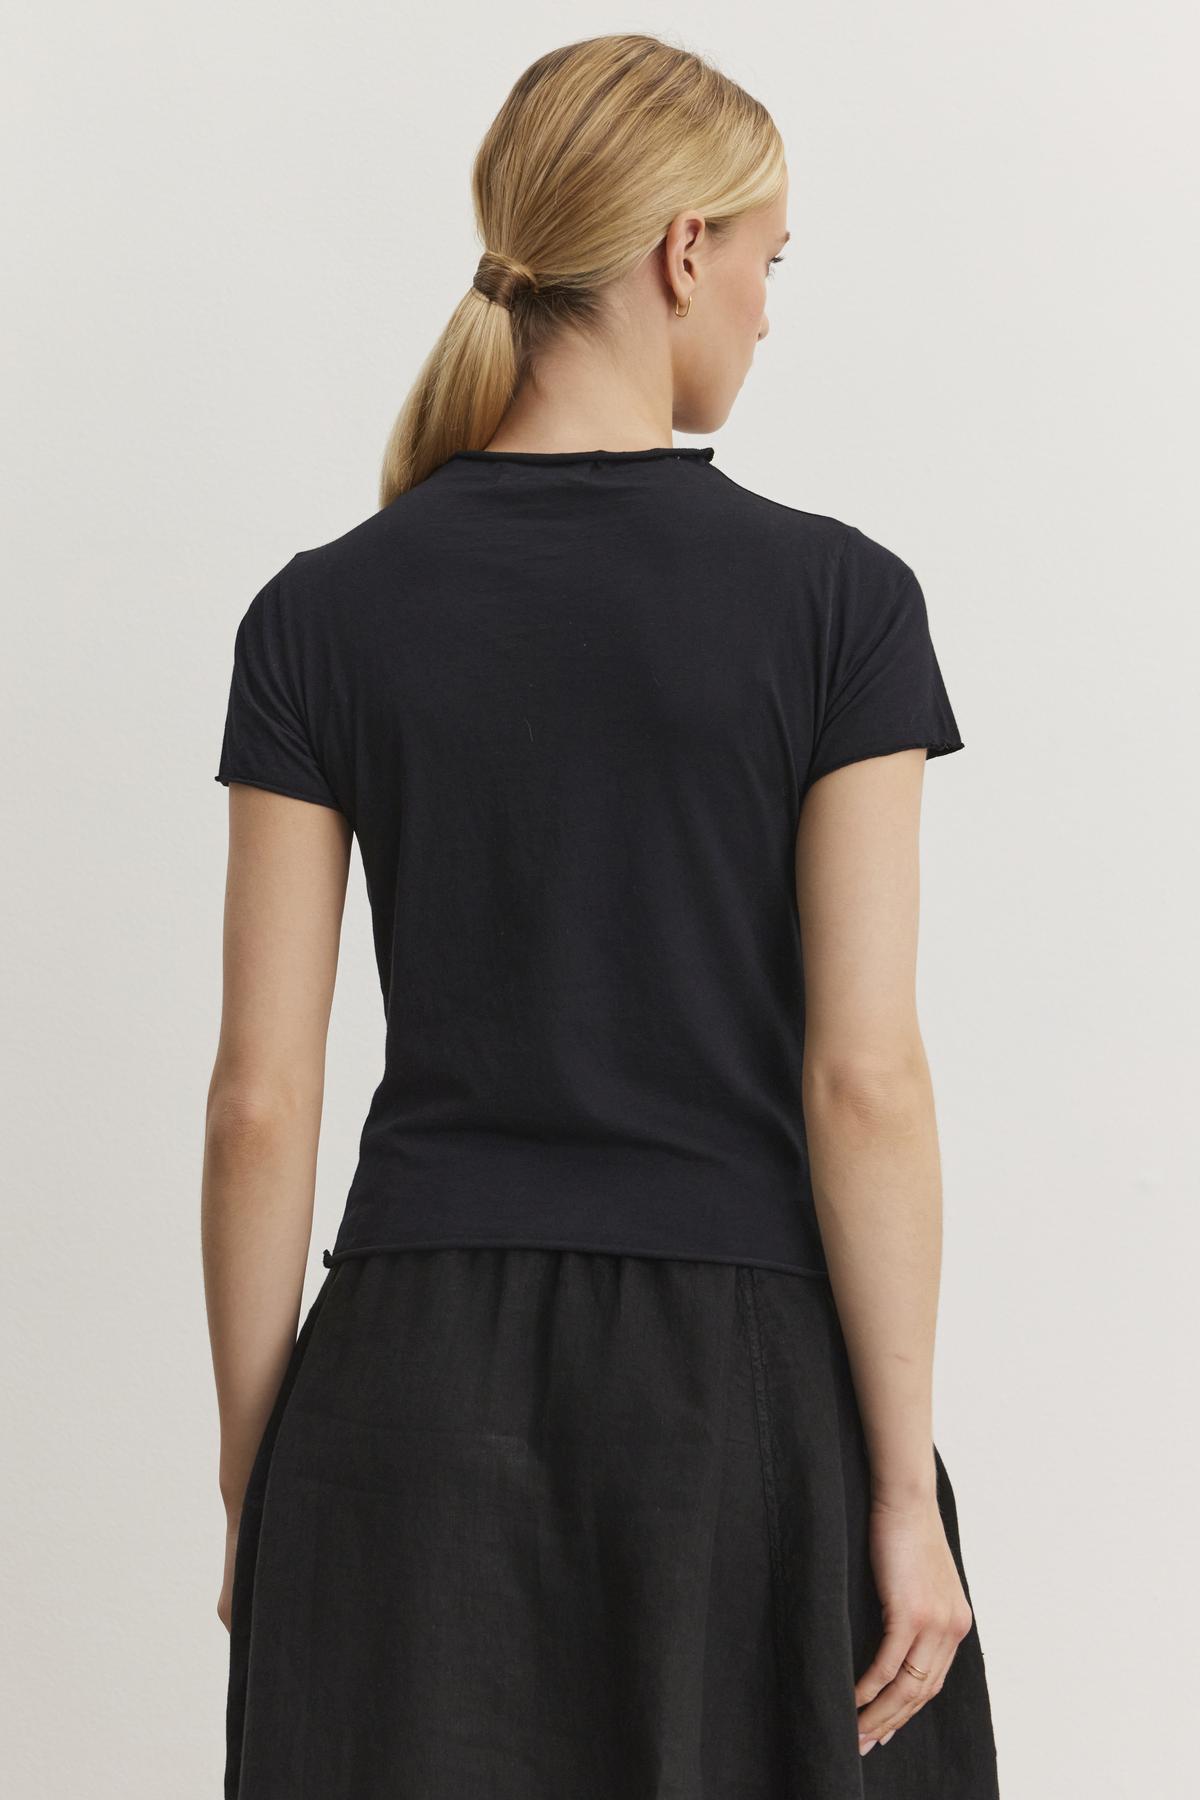 A person with blonde hair tied in a low ponytail is standing with their back to the camera, wearing a fitted cropped black JACKIE MOCK NECK TEE by Velvet by Graham & Spencer and a black skirt.-37104257859777